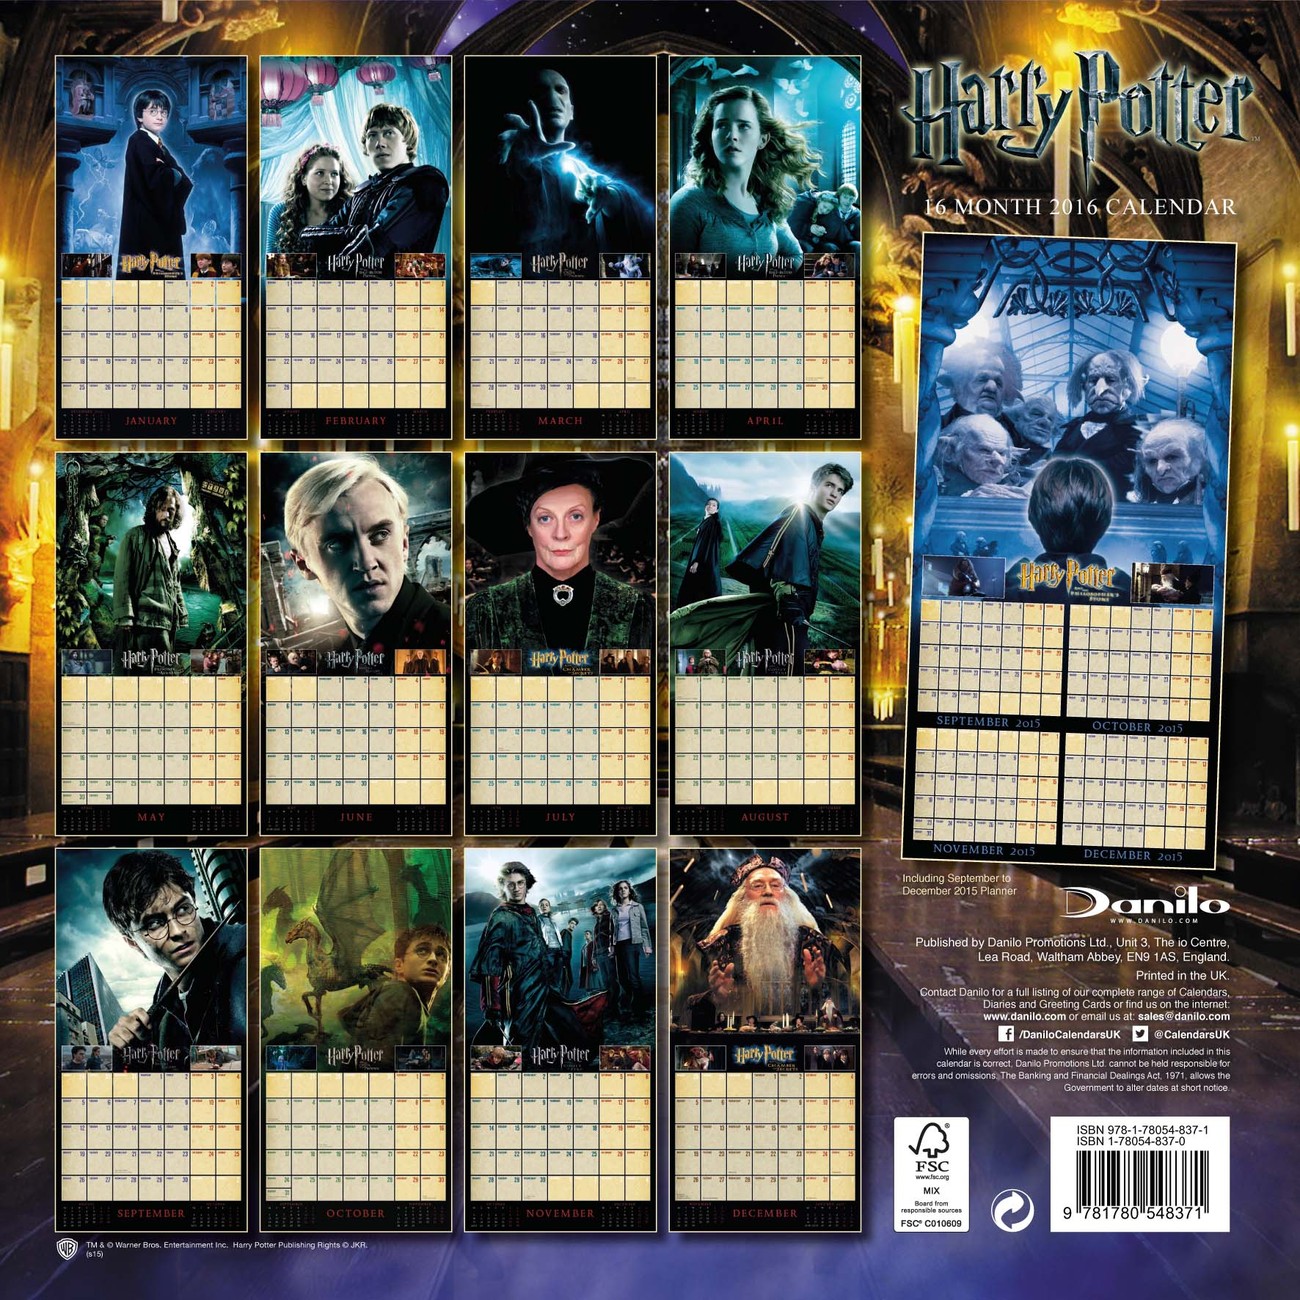 Harry Potter Calendars 2021 on UKposters/UKposters